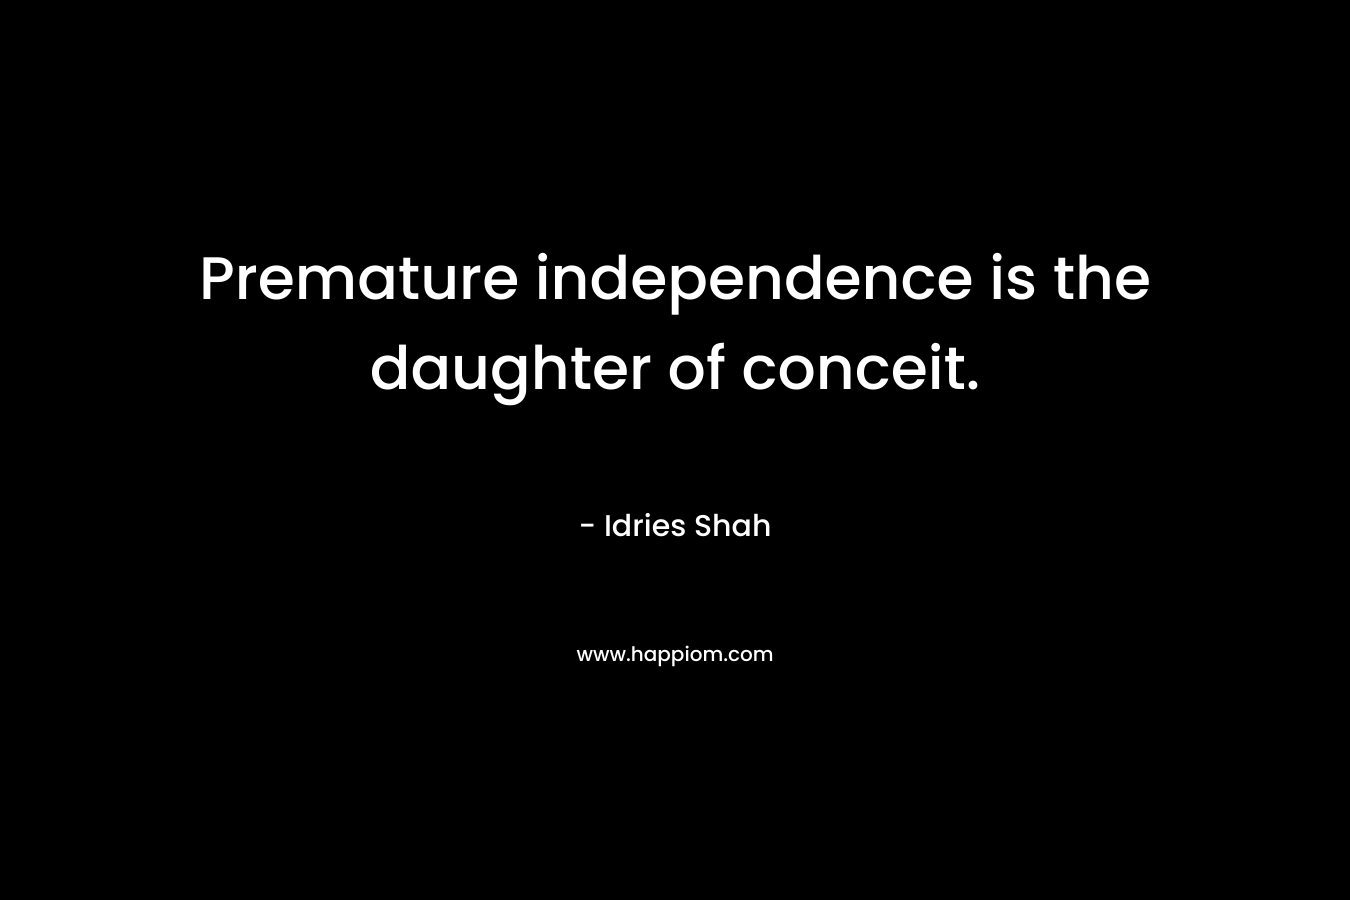 Premature independence is the daughter of conceit. – Idries Shah